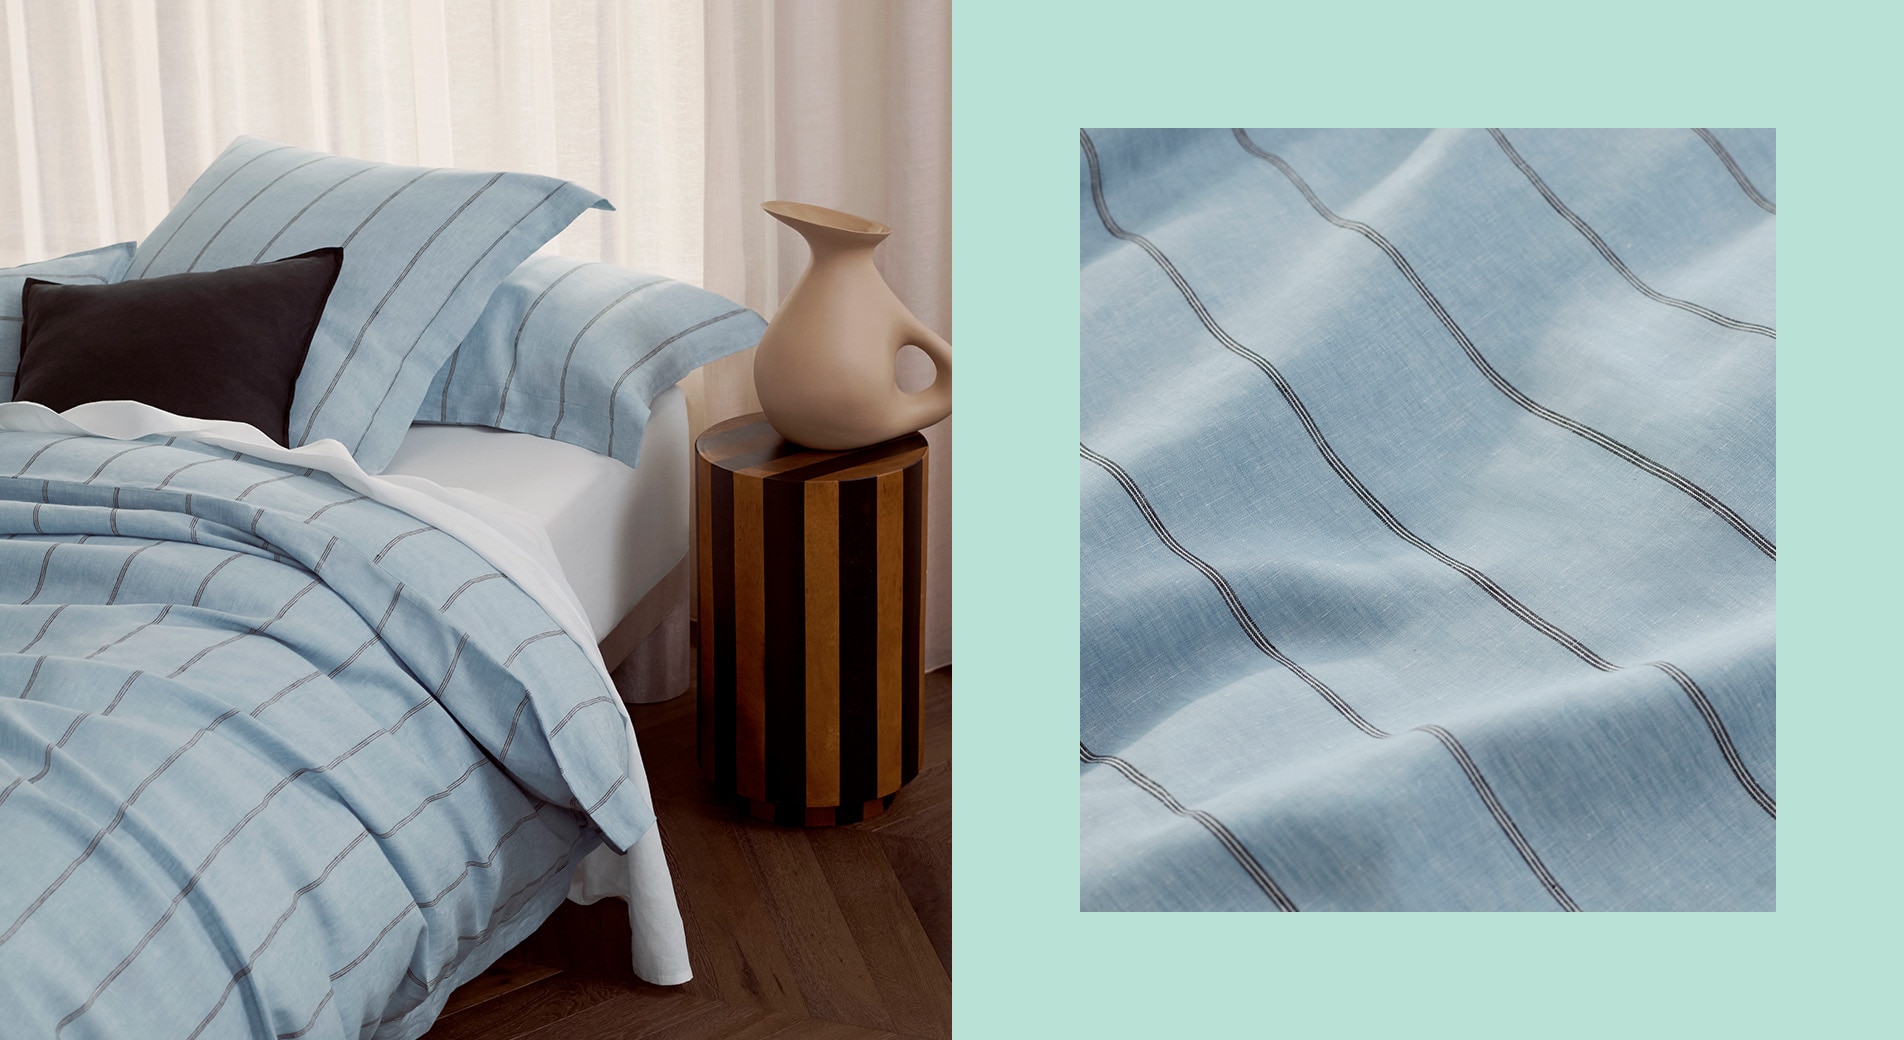 split image. left side: styled bed with blue striped bedding, white sheeting, black cushion. brown bedside table with white jug. right side: close up of striped bedding, with light blue border surrounding.